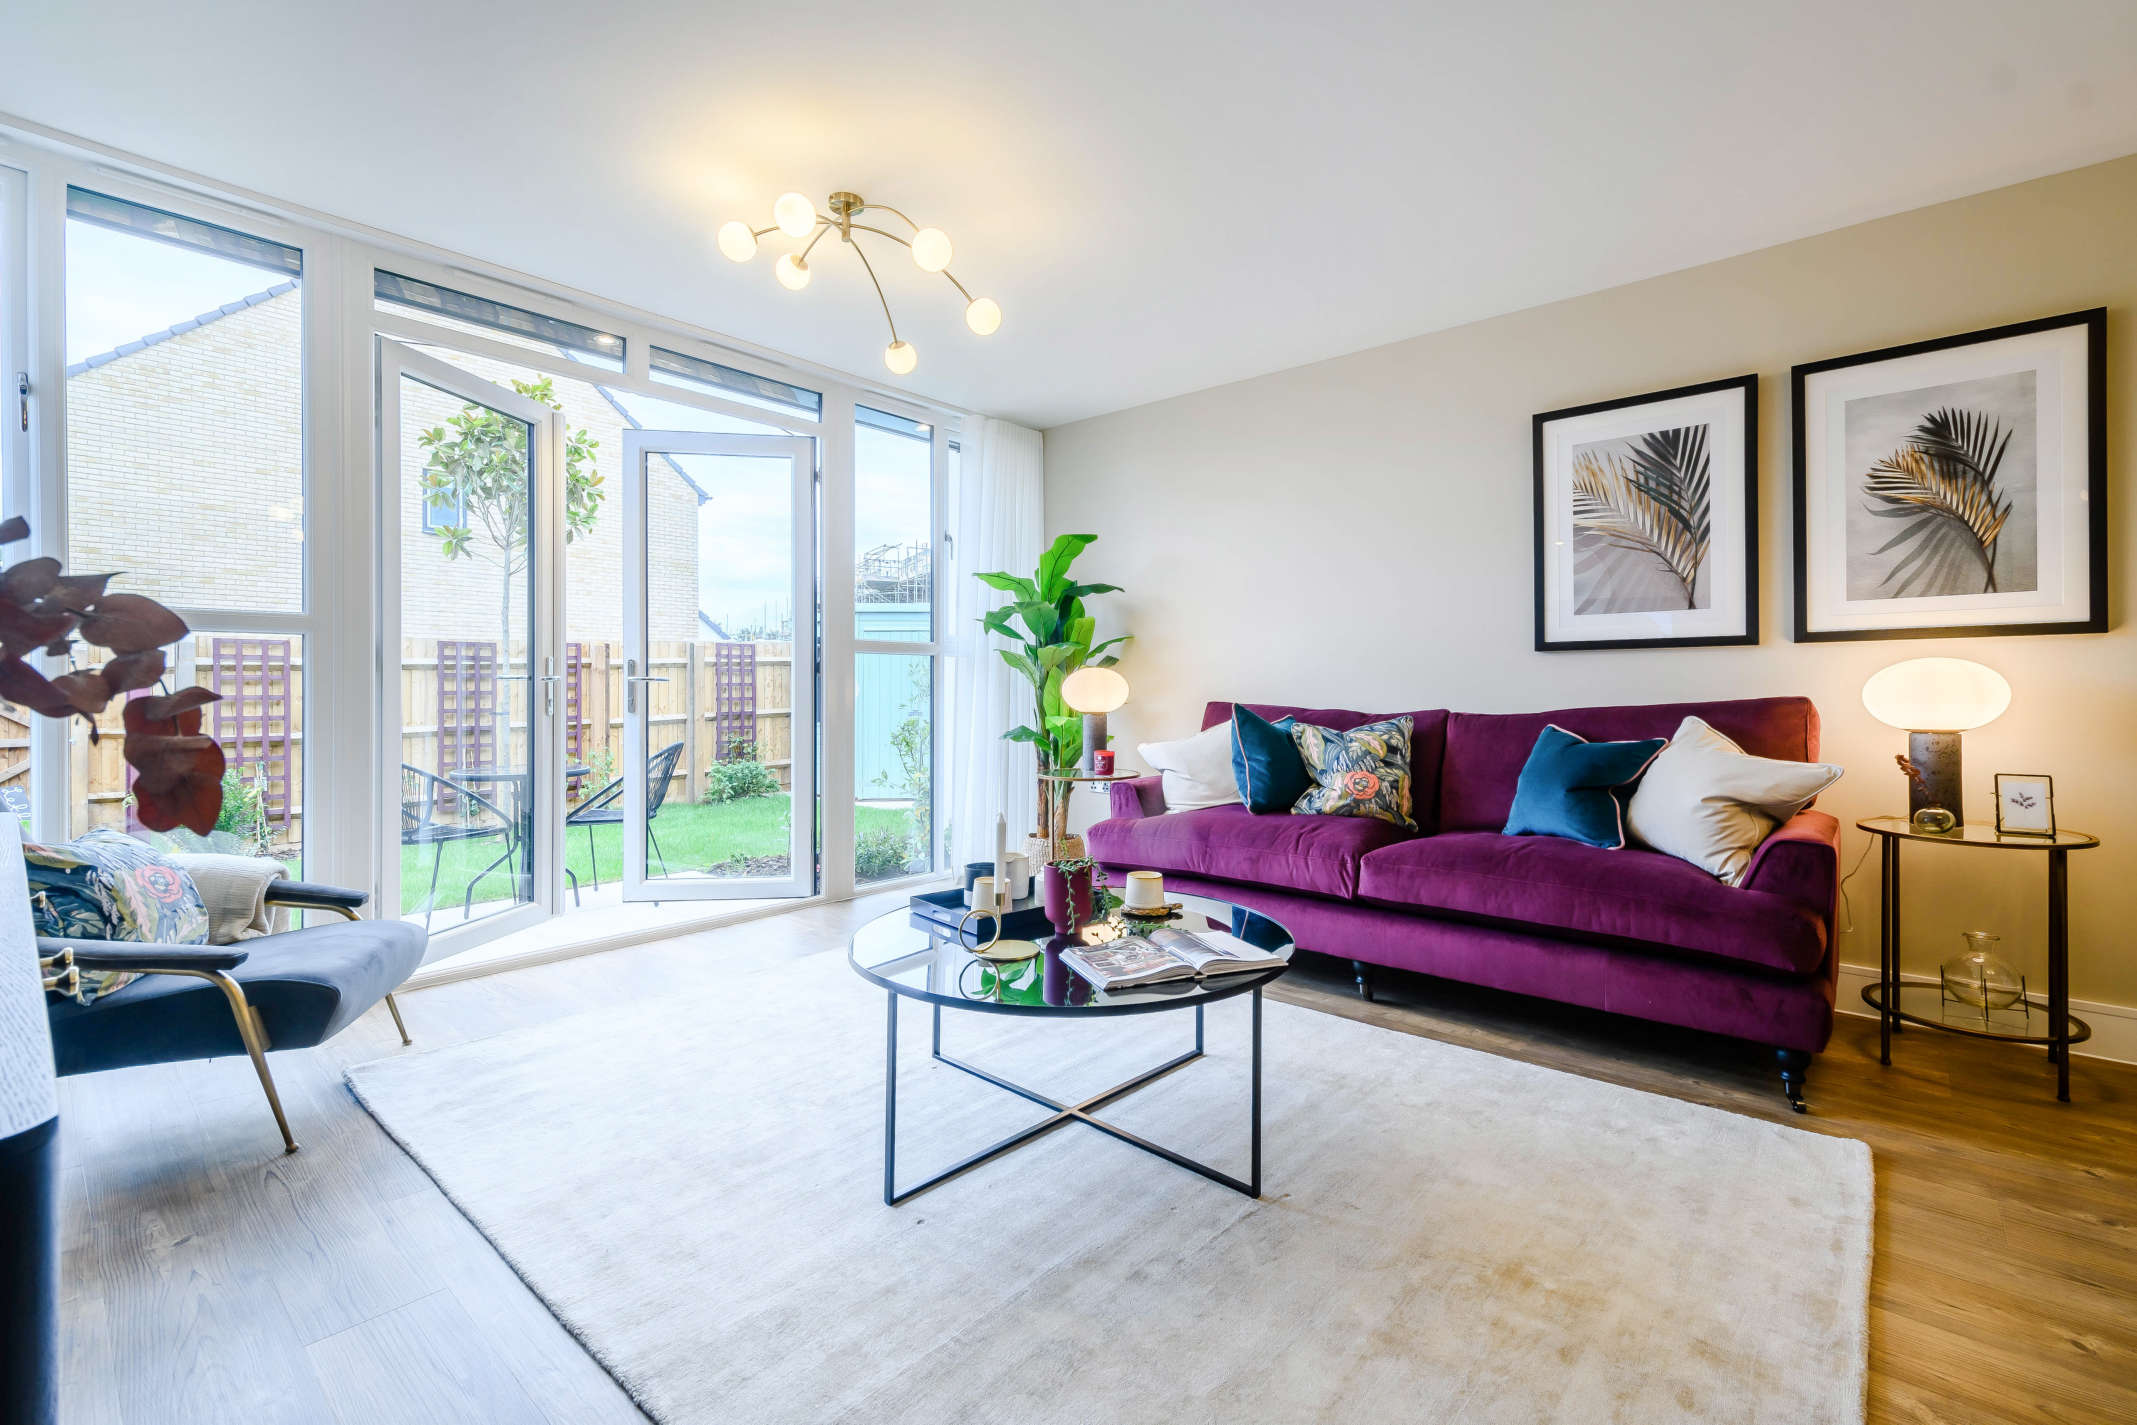 A light and spacious 3 bedroom, 3 storey semi-detached home with an extensive kitchen, lounge and dining area. The principal bedroom is the perfect hideaway with beautiful galleried landing, walk-in wardrobe and ensuite shower room.